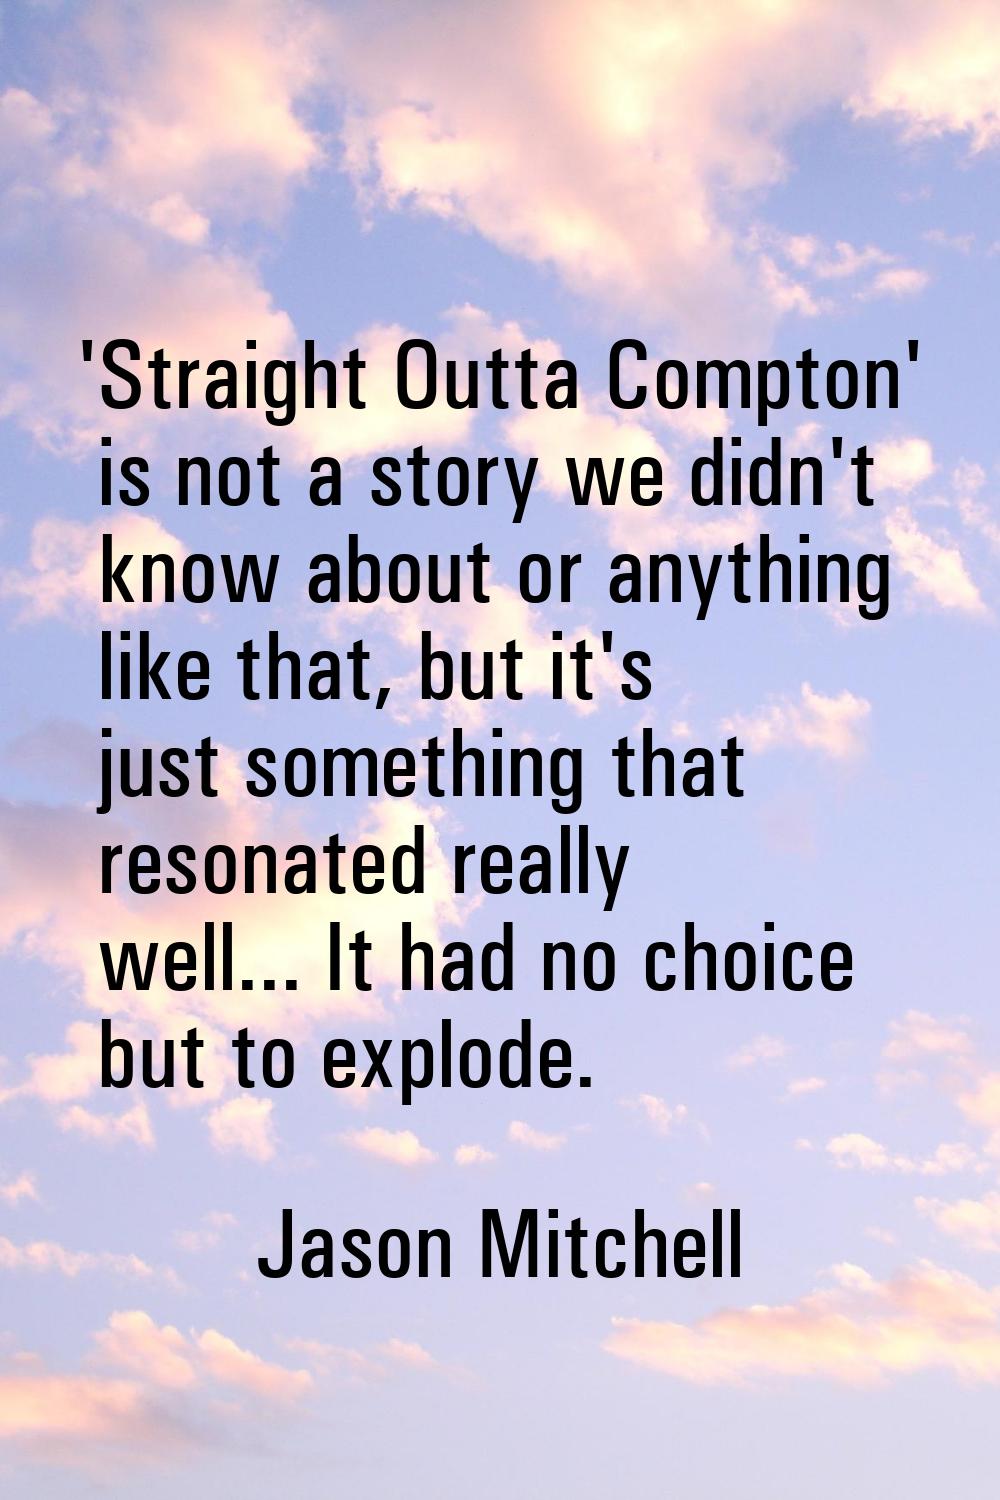 'Straight Outta Compton' is not a story we didn't know about or anything like that, but it's just s